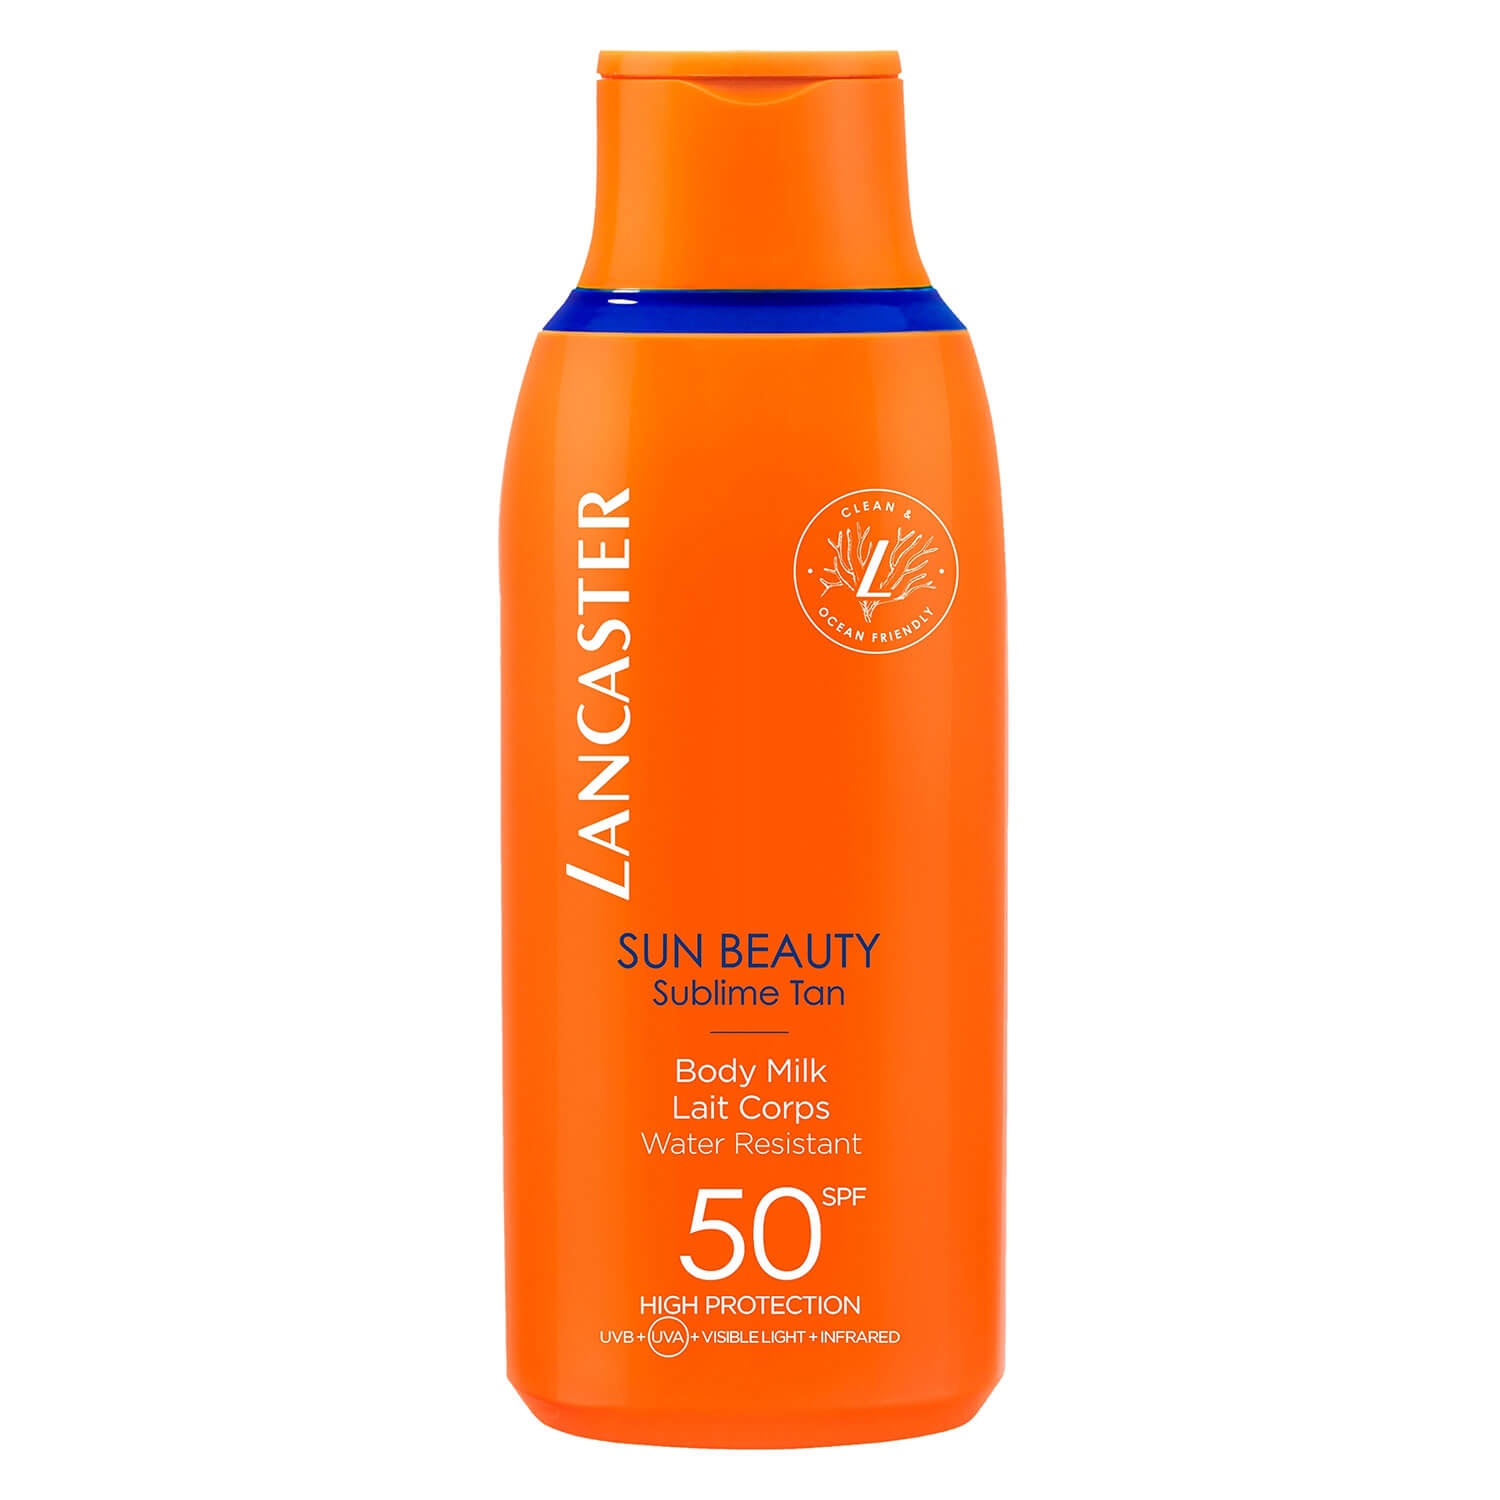 Product image from Sun Beauty - Sublime Tan Body Milk SPF50